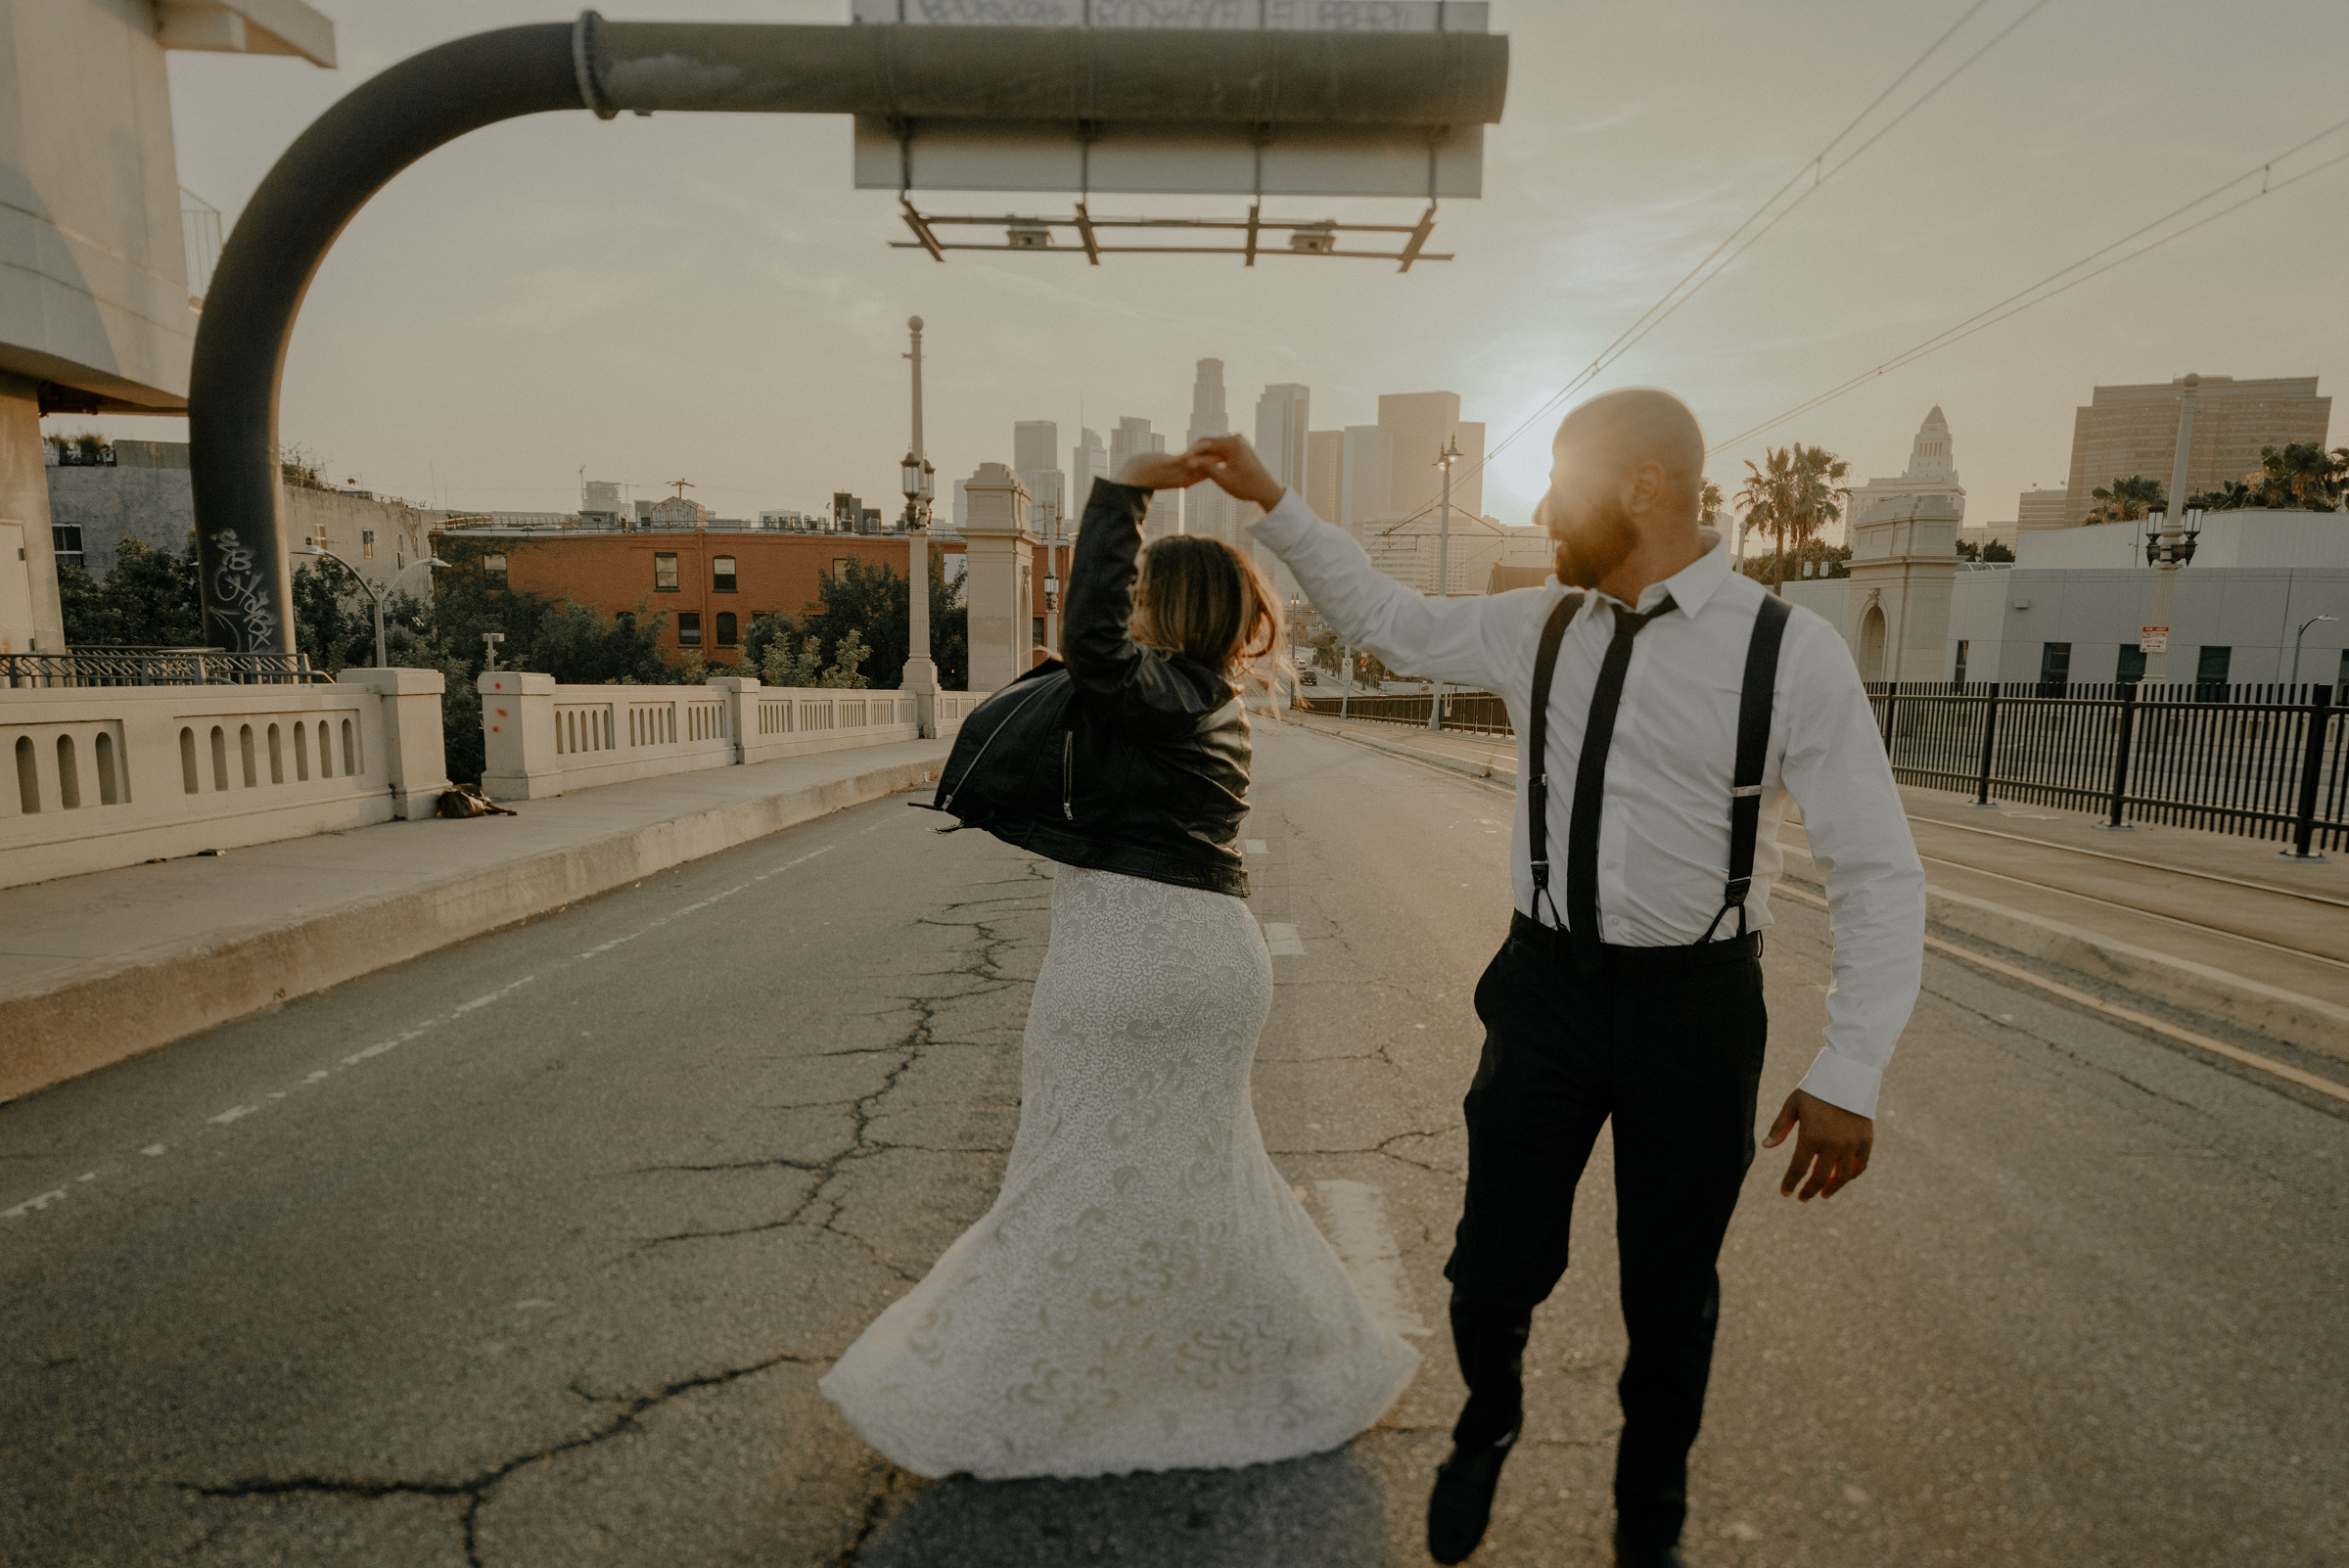 Isaiah + Taylor Photography - Los Angeles Wedding Photographer - DTLA Arts District  Engagement Session  067.jpg